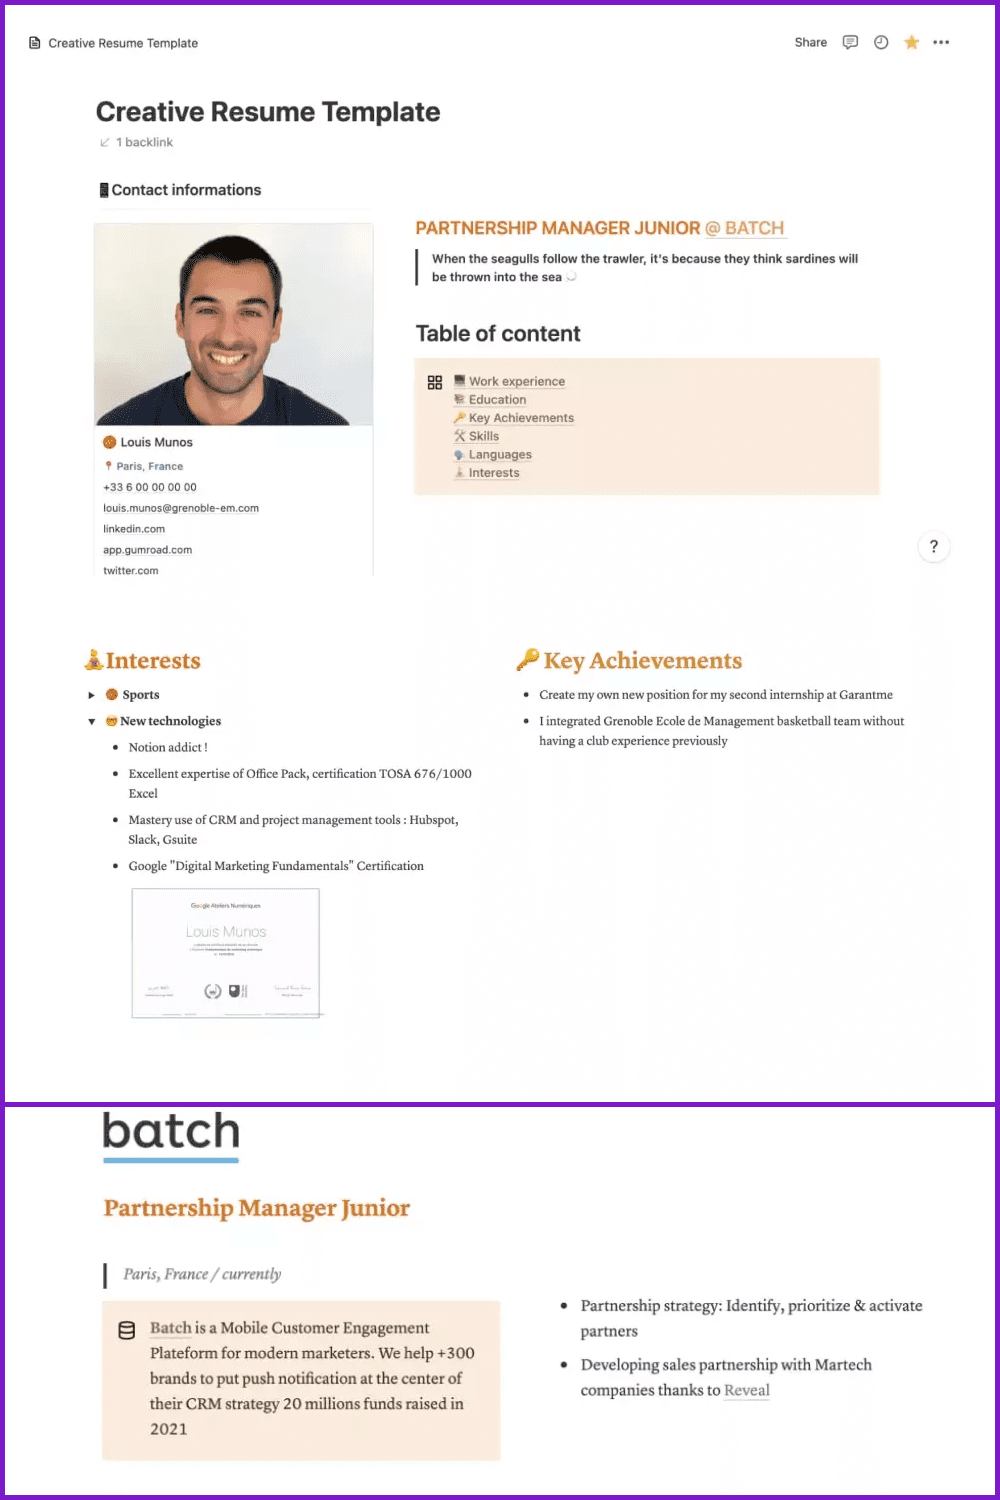 Creative Resume Template (Notion templates for students).